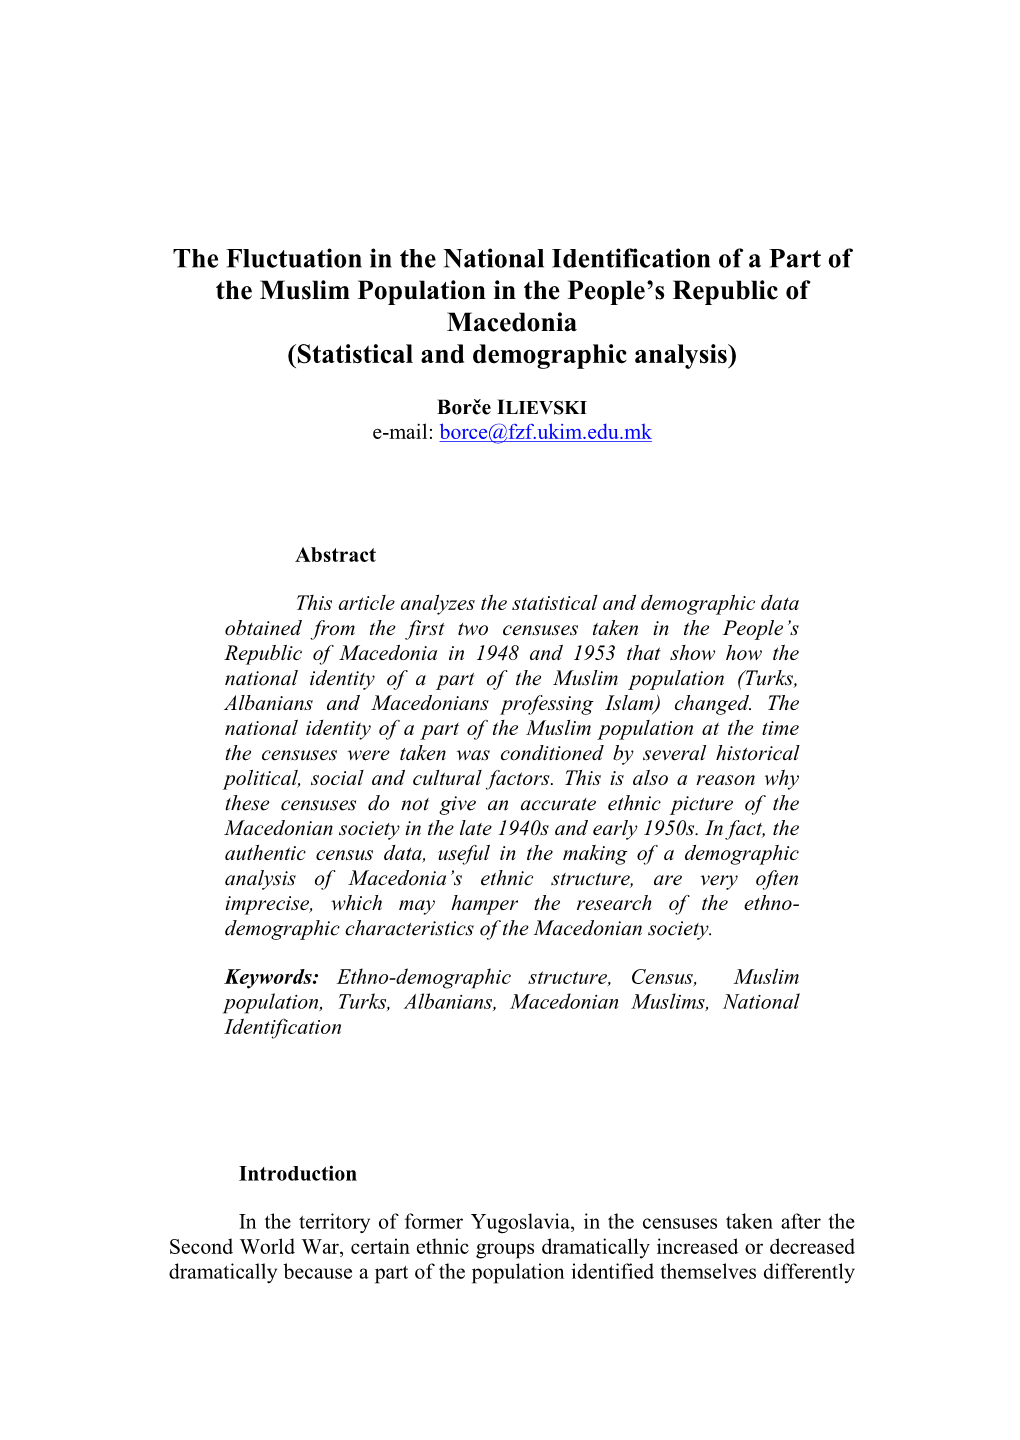 The Fluctuation in the National Identification of a Part of the Muslim Population in the People’S Republic of Macedonia (Statistical and Demographic Analysis)